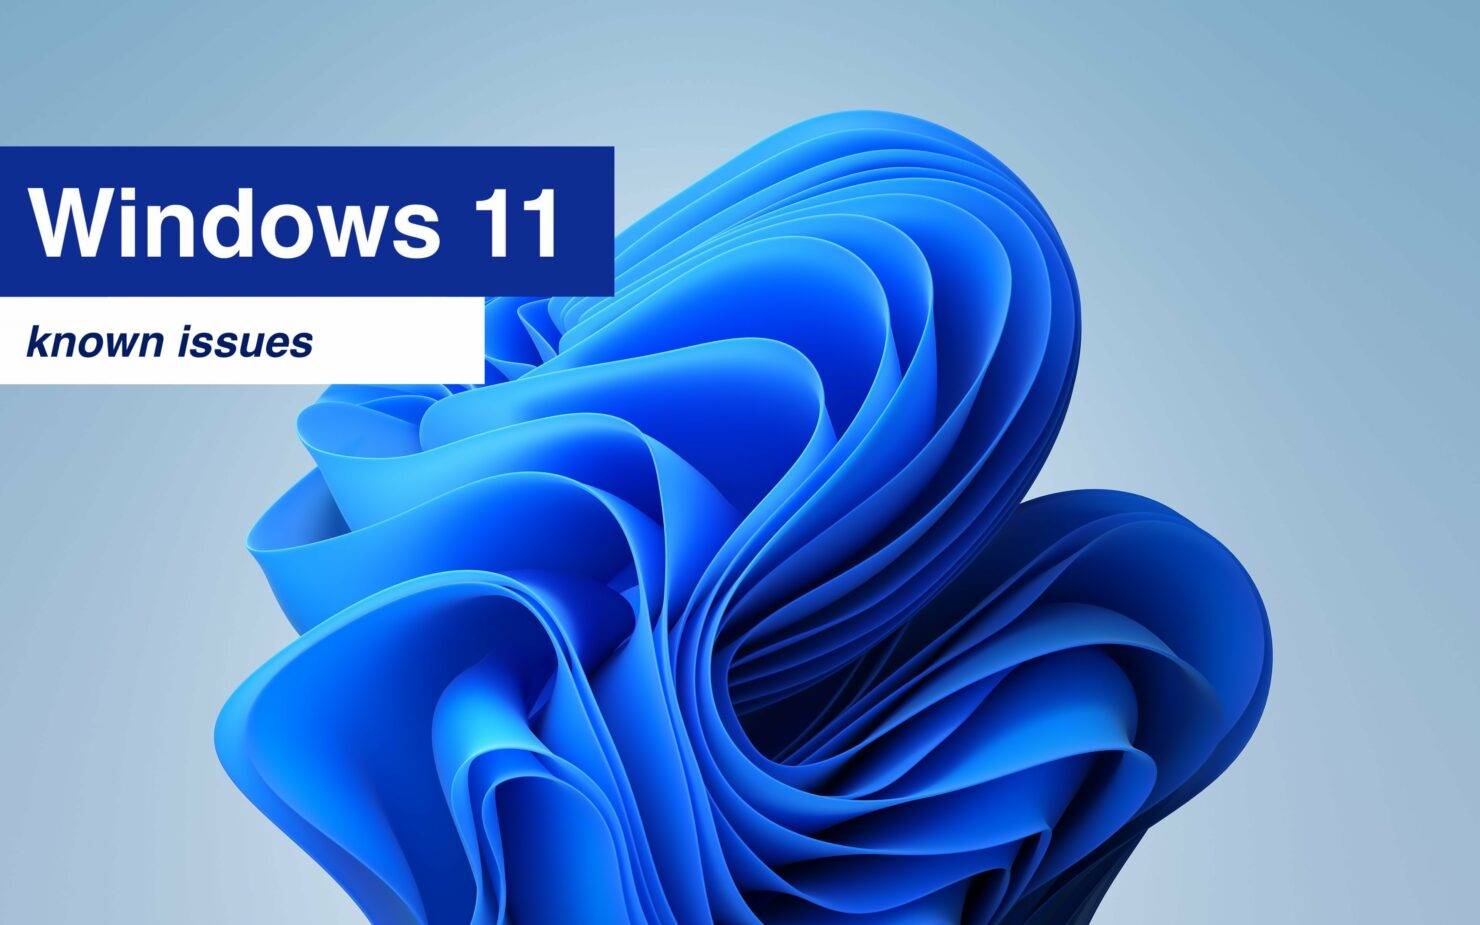 windows-11-known-issues-1480x925-1